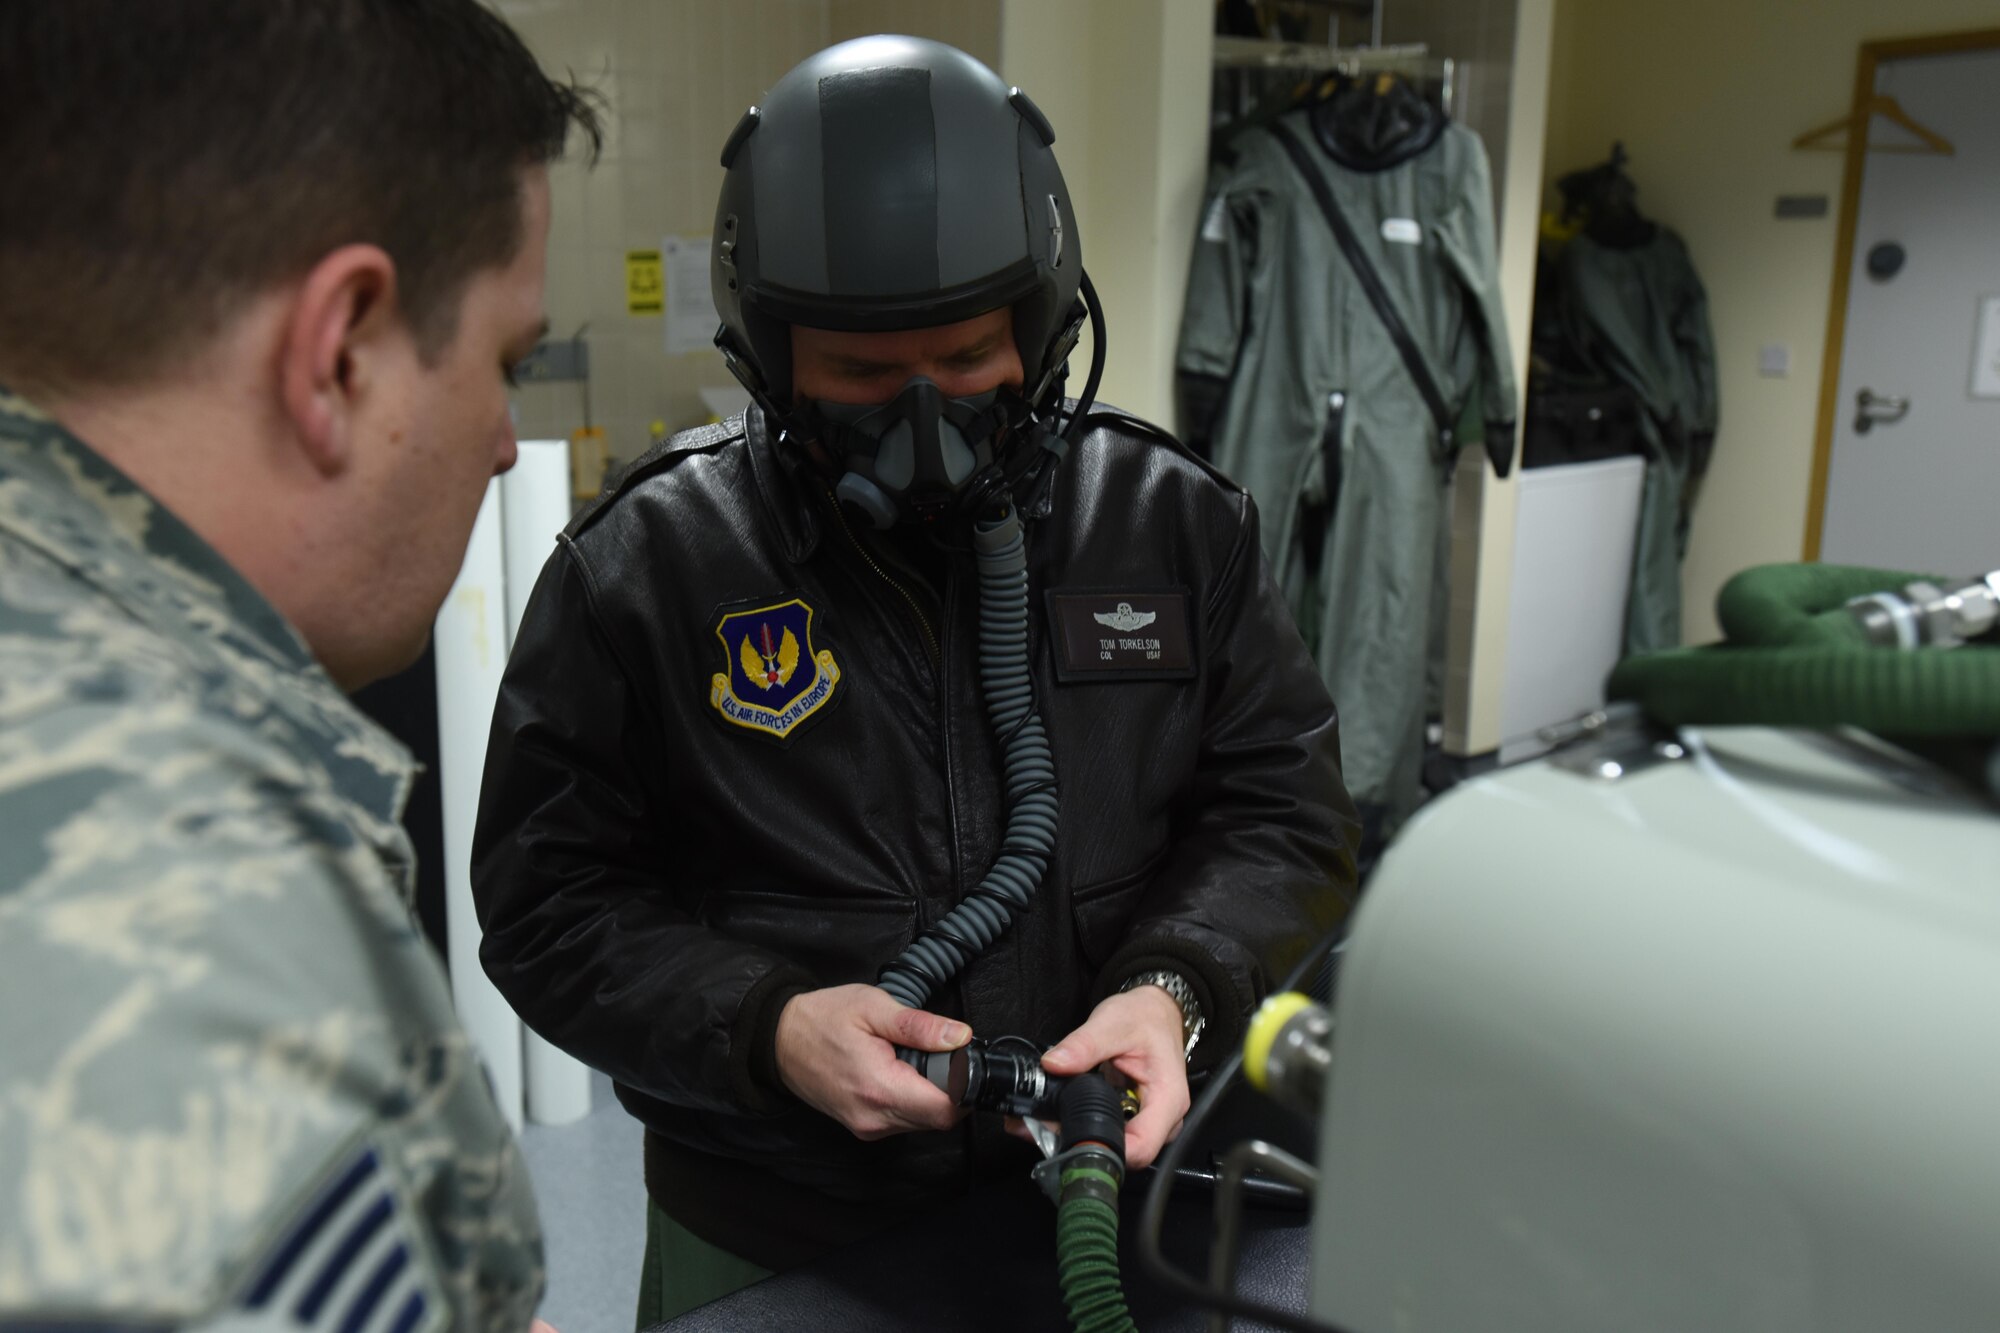 U.S. Air Force Col. Thomas Torkelson, 100th Air Refueling Wing commander, tests his helmet before his flight in an F-15D Eagle Dec. 2, 2016, on RAF Lakenheath, England. Torkelson flew in an F-15 to see the air refueling process from the eyes of the fighter pilot (U.S. Air Force photo/Airman 1st Class Eli Chevalier)